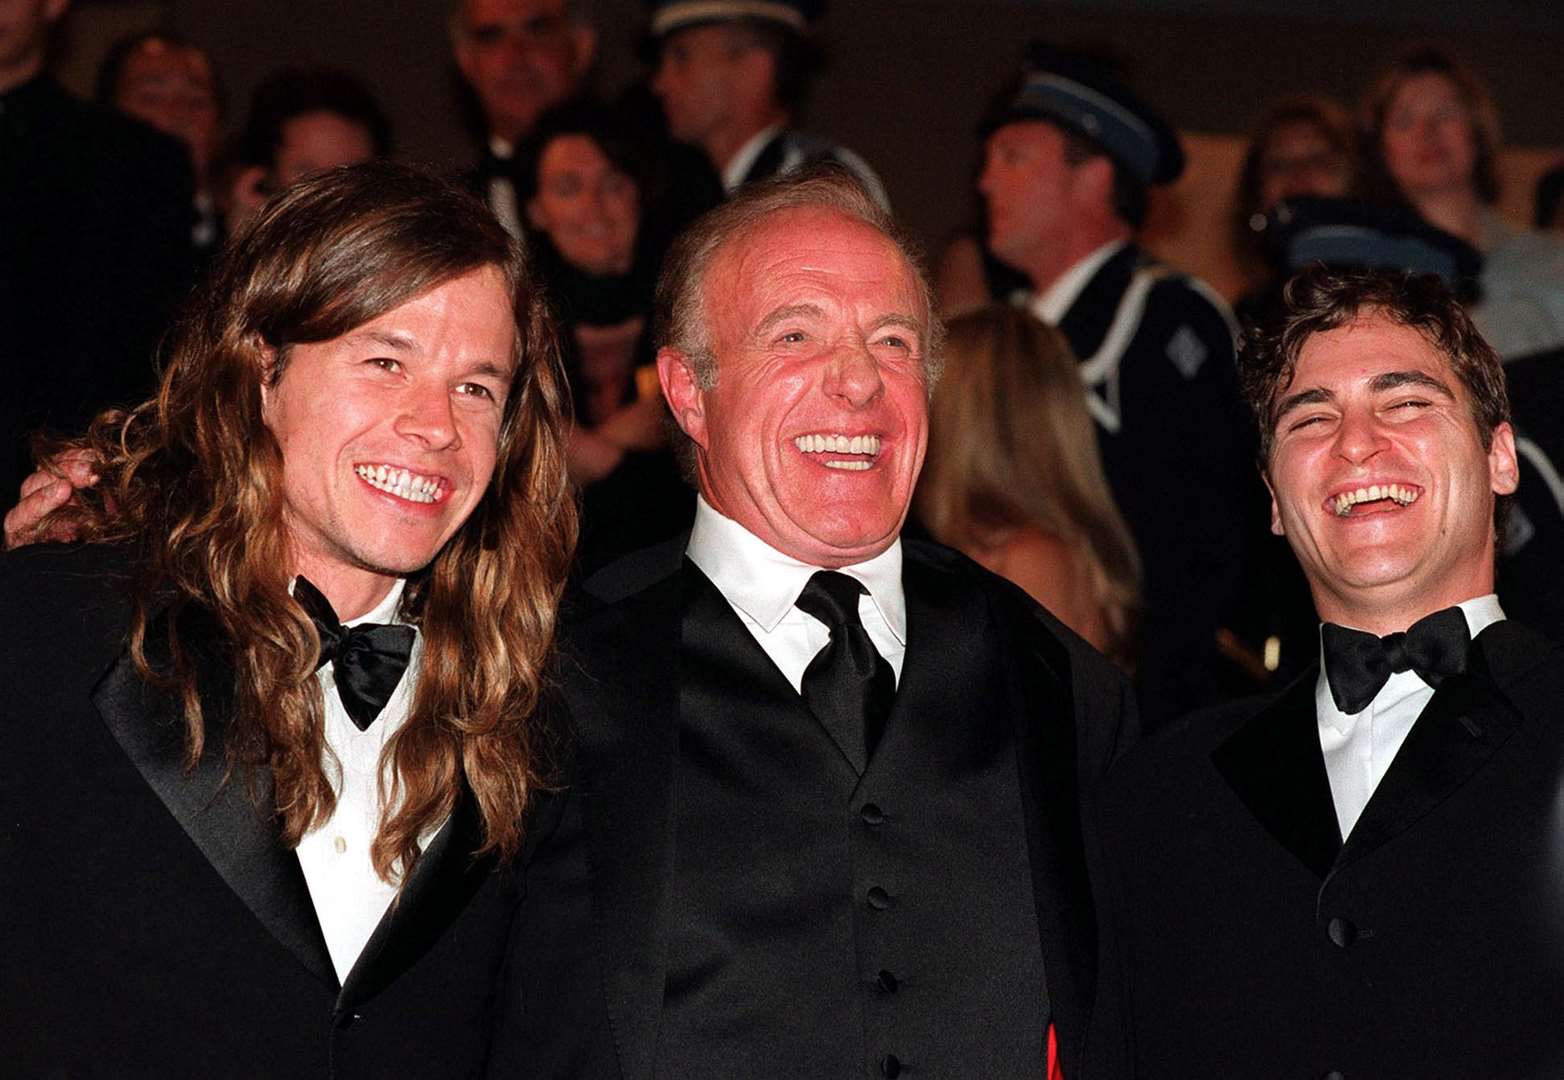 James Caan, centre, with Mark Wahlberg, left, and Joaquin Phoenix (Toby Melville/PA)